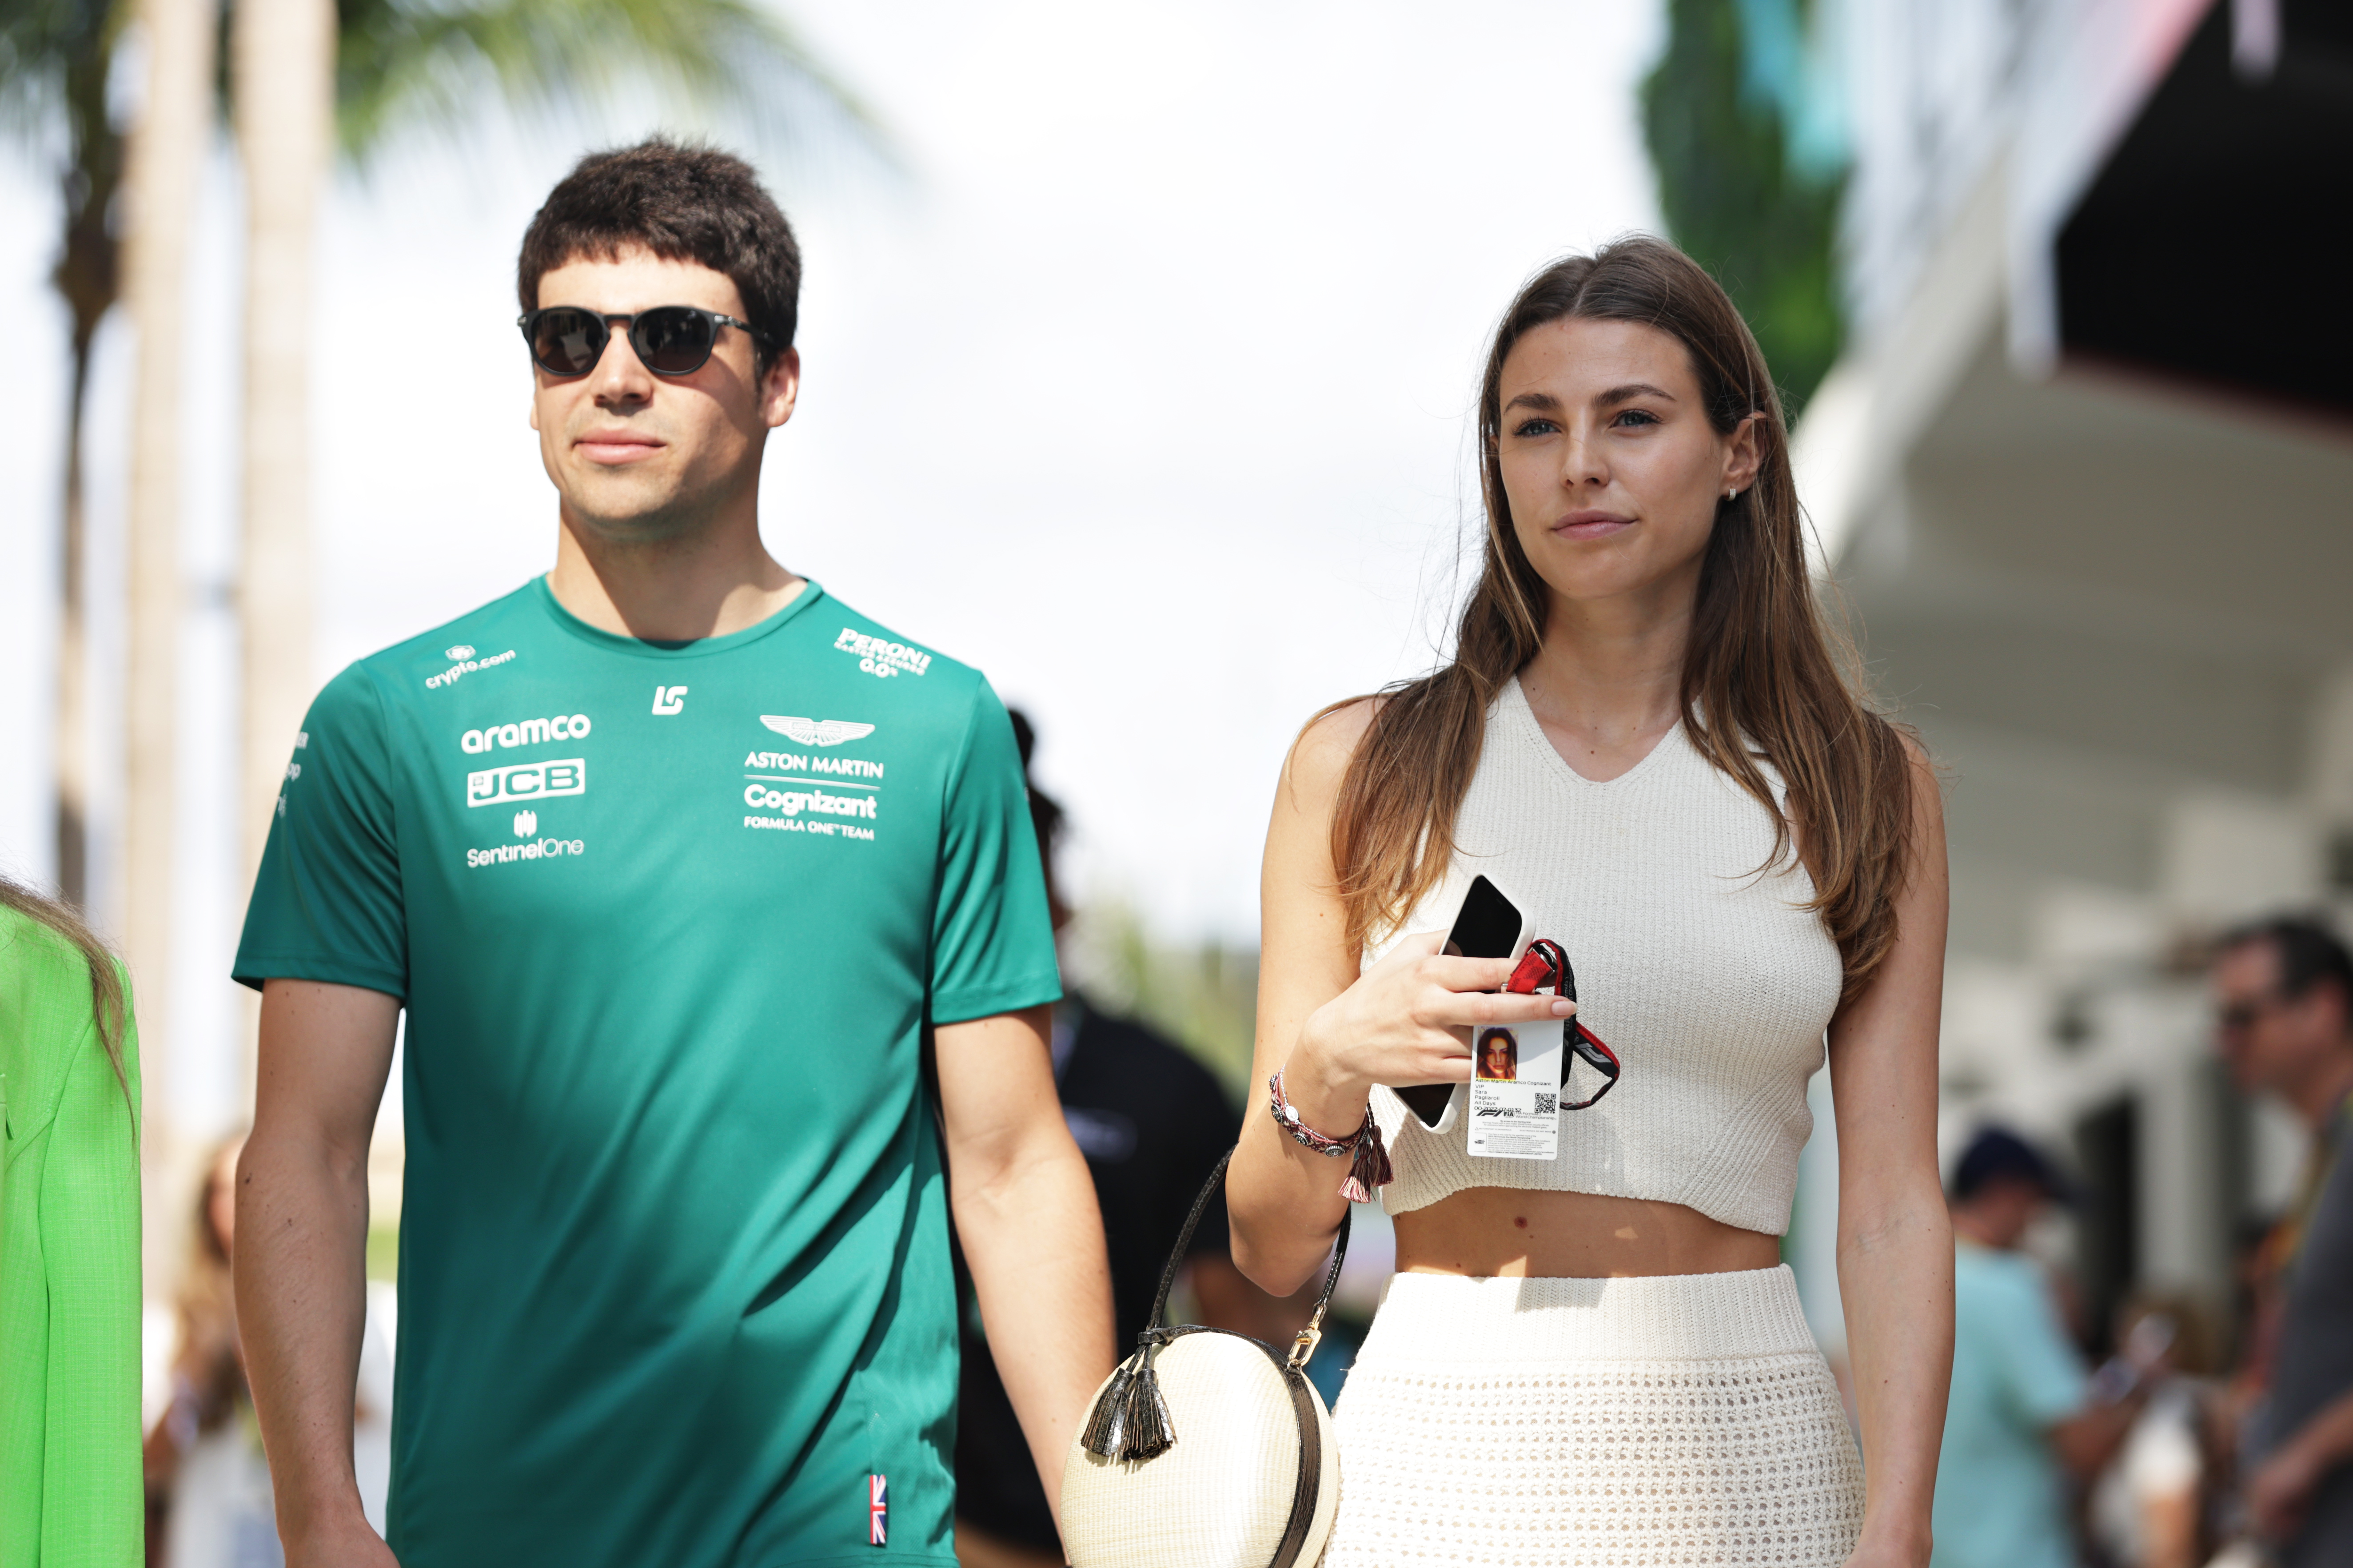 Sara has been dating F1 driver Lance Stroll for more than two years